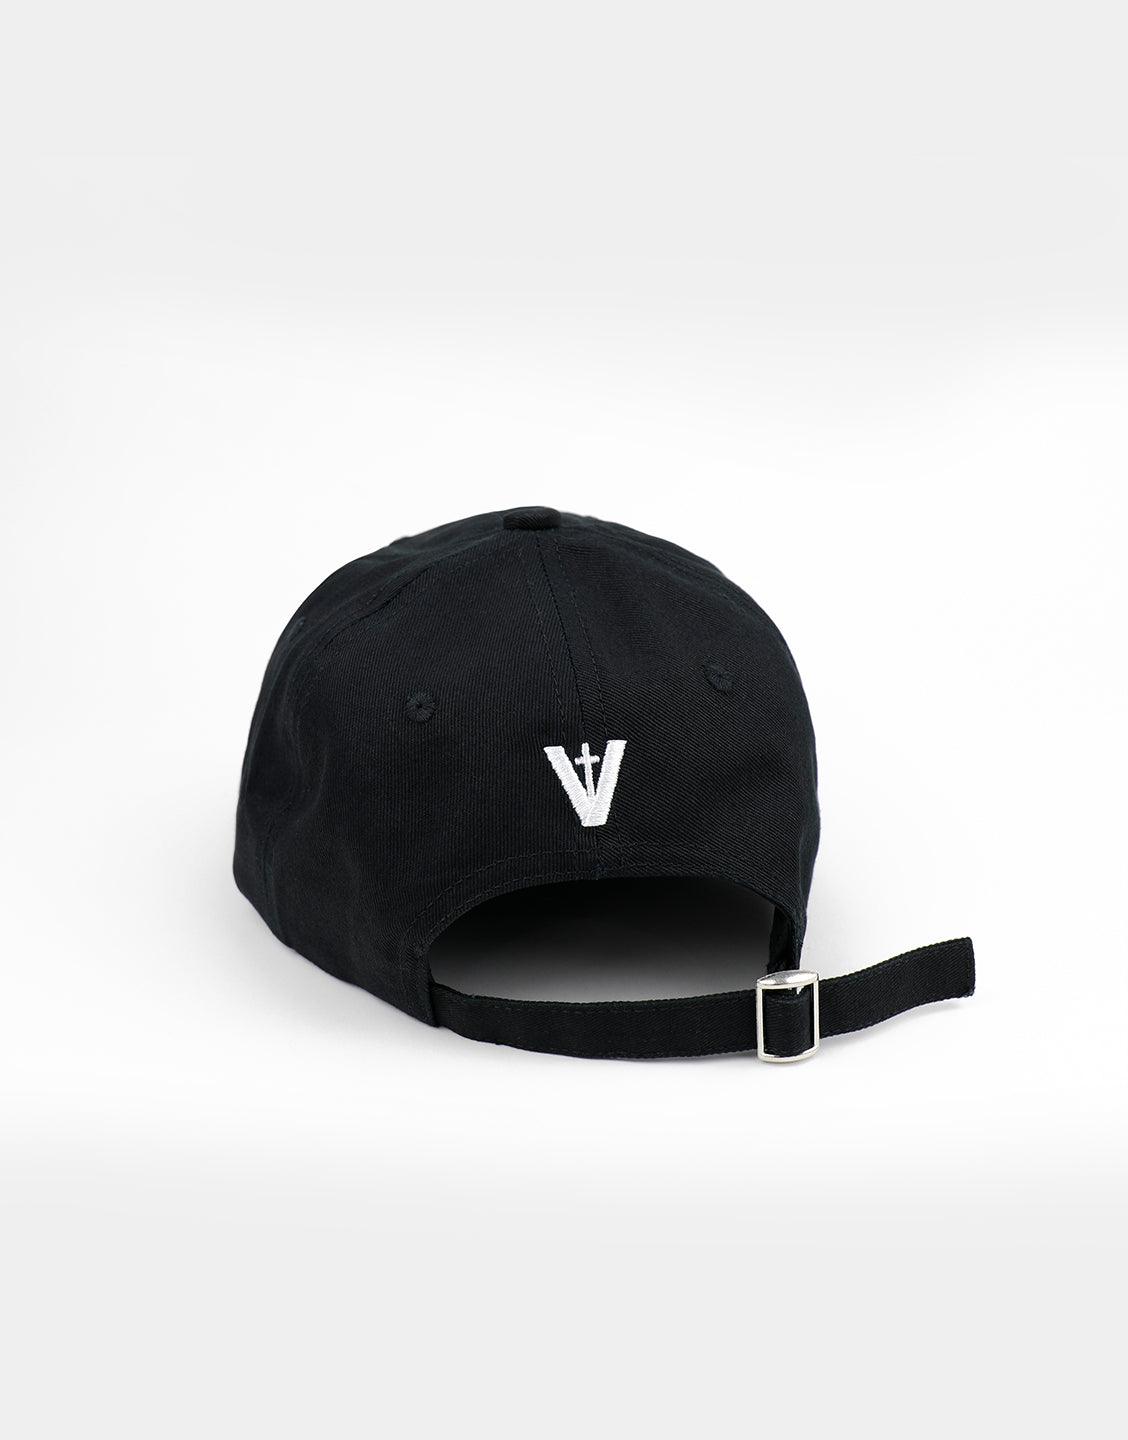 Embroidered - VOTC Clothing